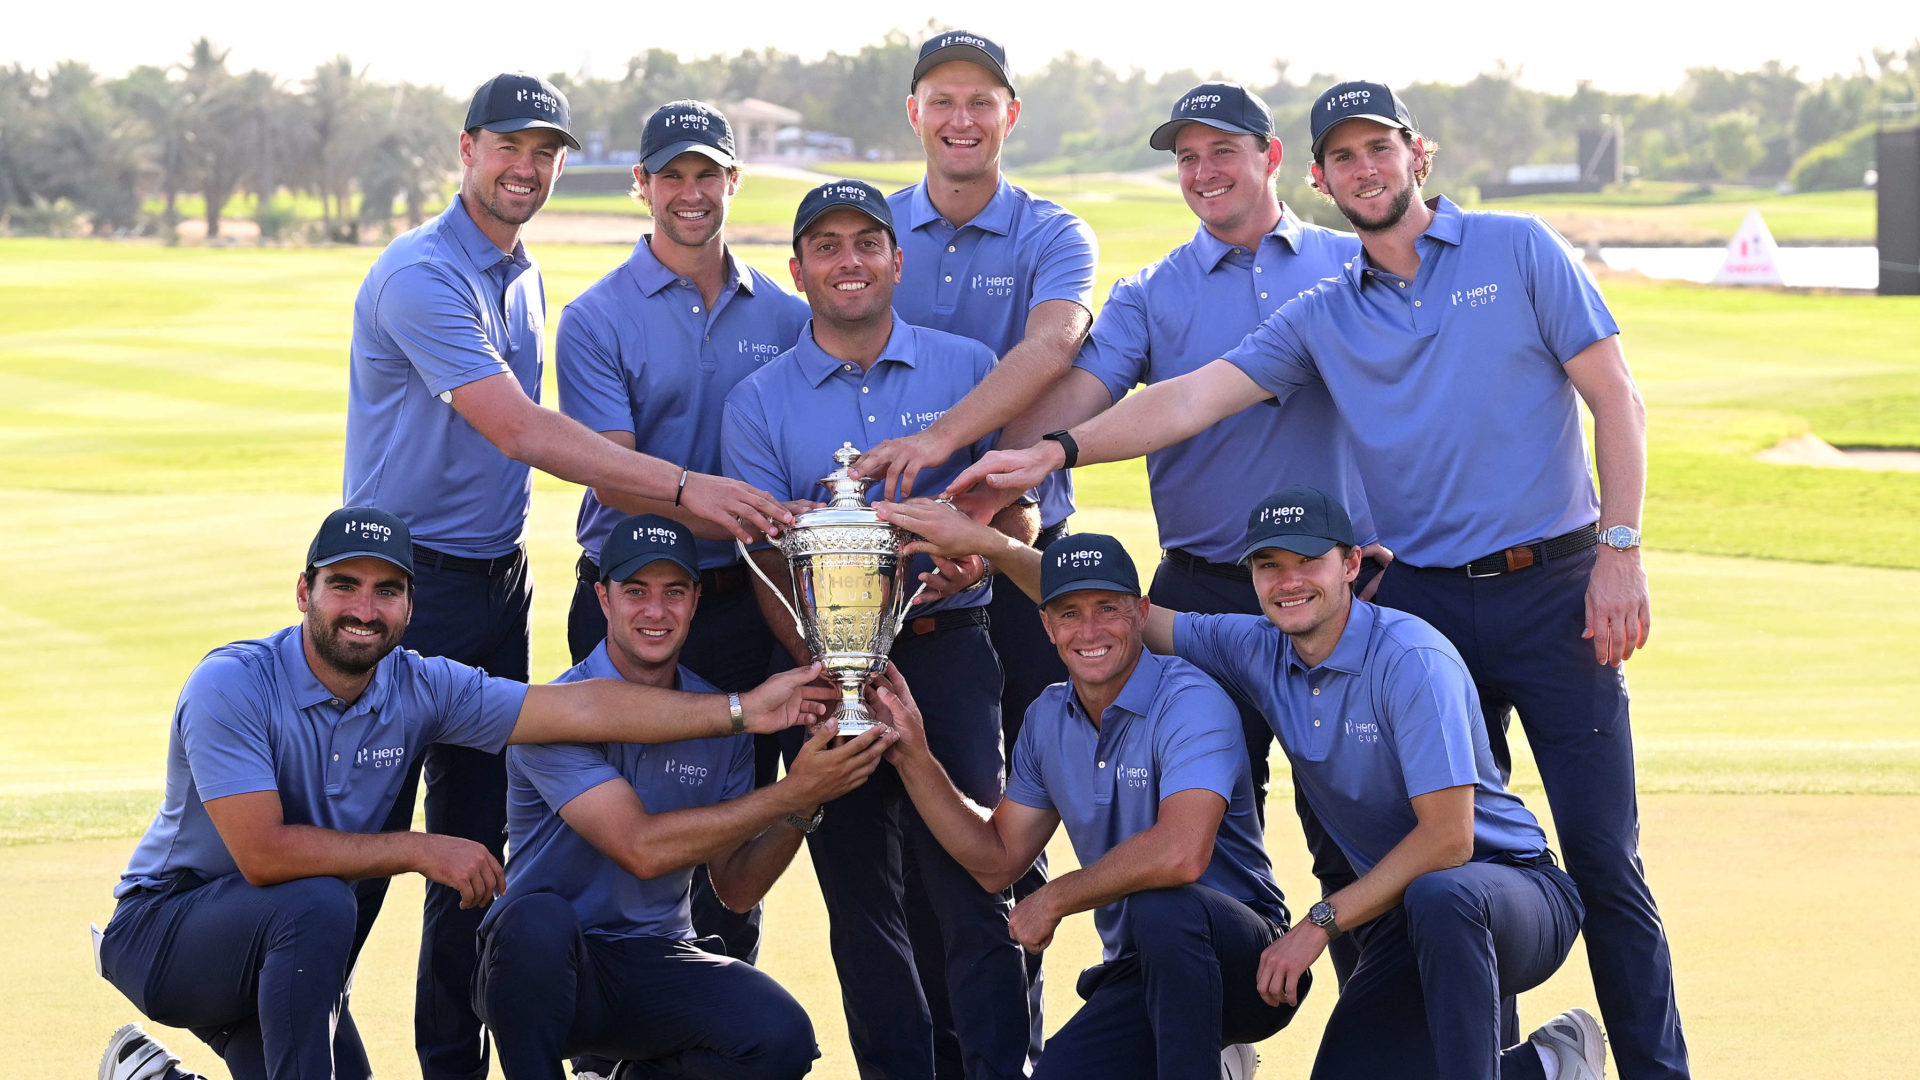 ABU DHABI, UNITED ARAB EMIRATES - JANUARY 15: The Continental Europe team celebrate with the Hero Cup trophy after the singles matches on day three of the Hero Cup at Abu Dhabi Golf Club on January 15, 2023 in Abu Dhabi, United Arab Emirates. tour news (Photo by Ross Kinnaird/Getty Images)